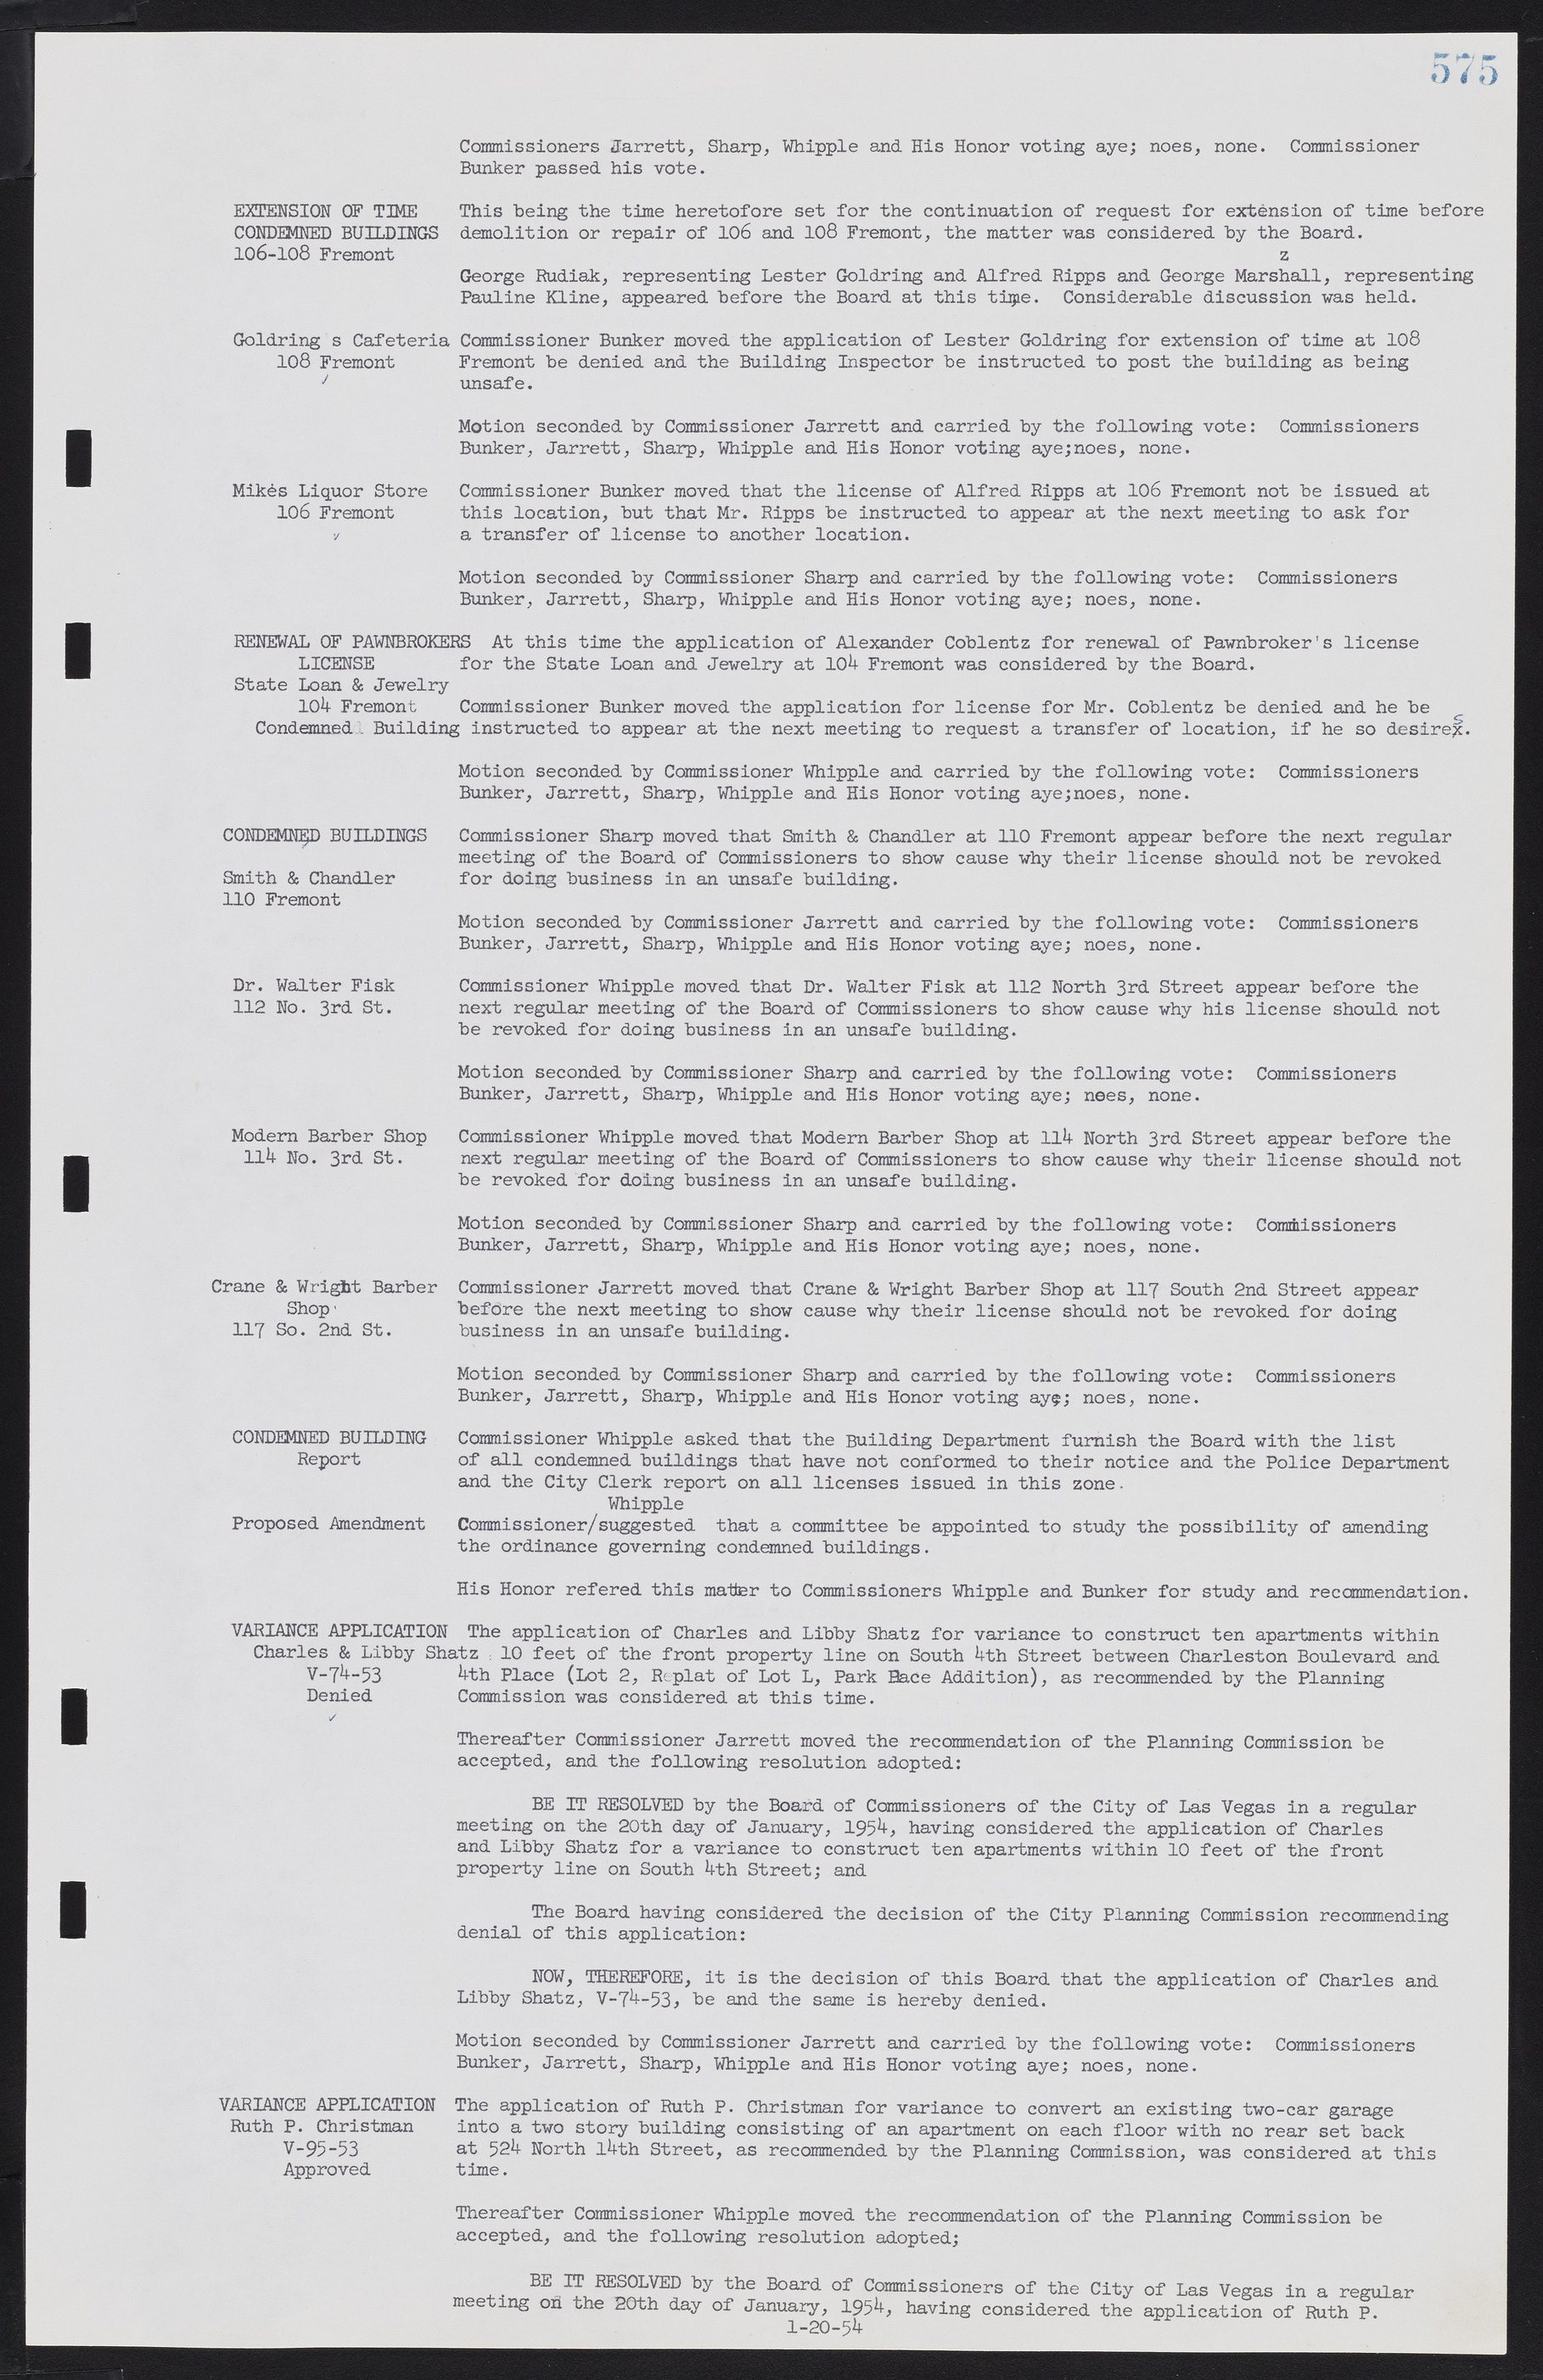 Las Vegas City Commission Minutes, May 26, 1952 to February 17, 1954, lvc000008-605